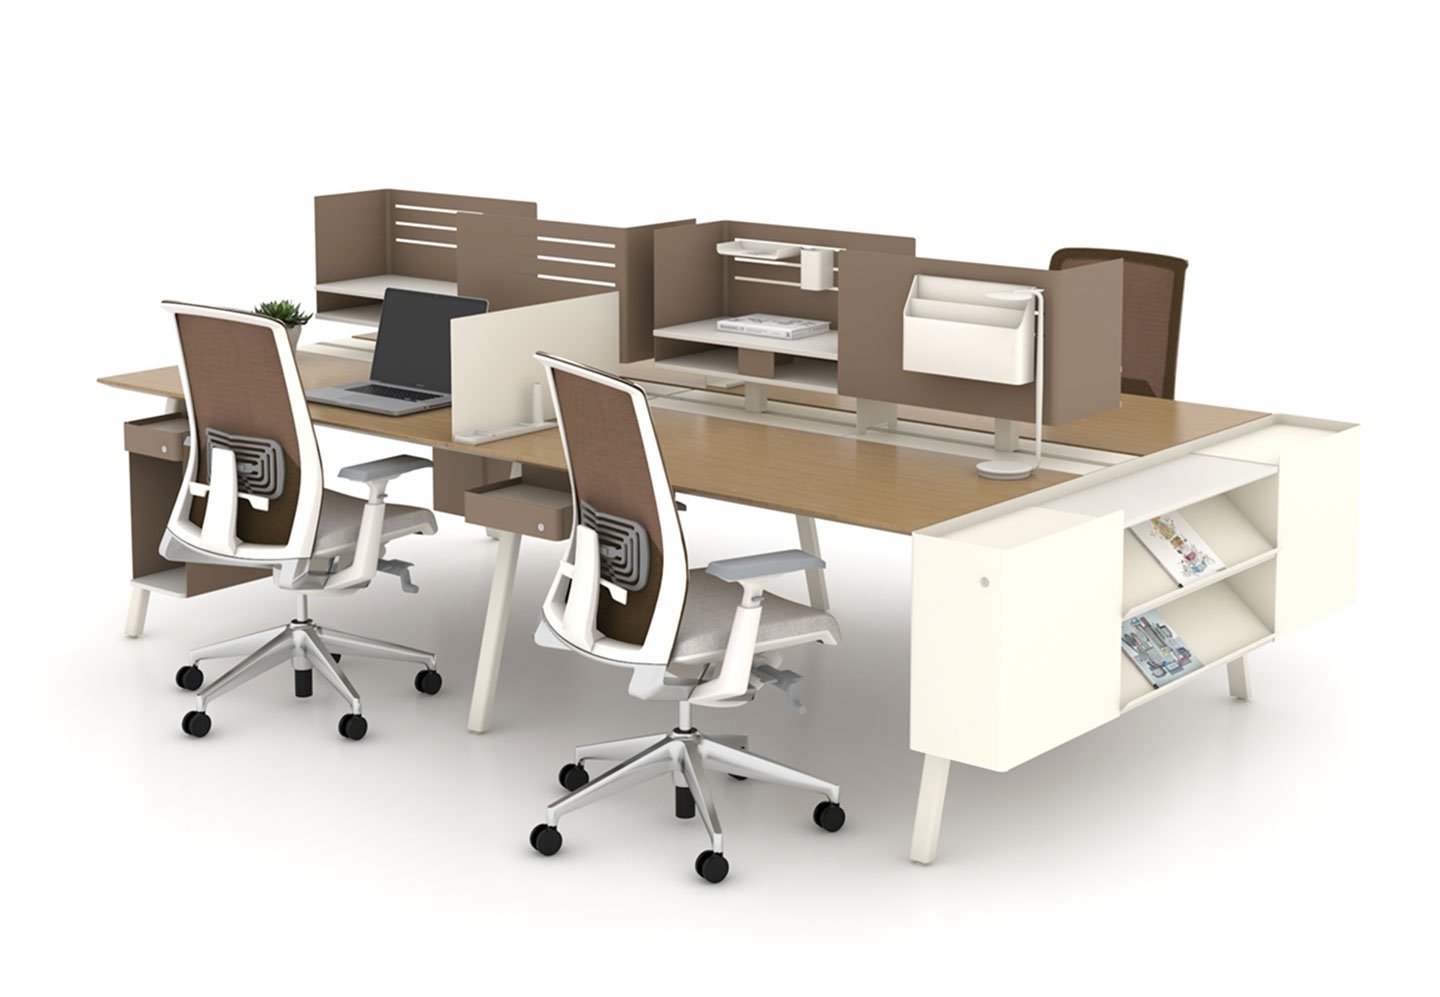 Intuity worksoace with two individual workspaces and Very chair in brown and white.